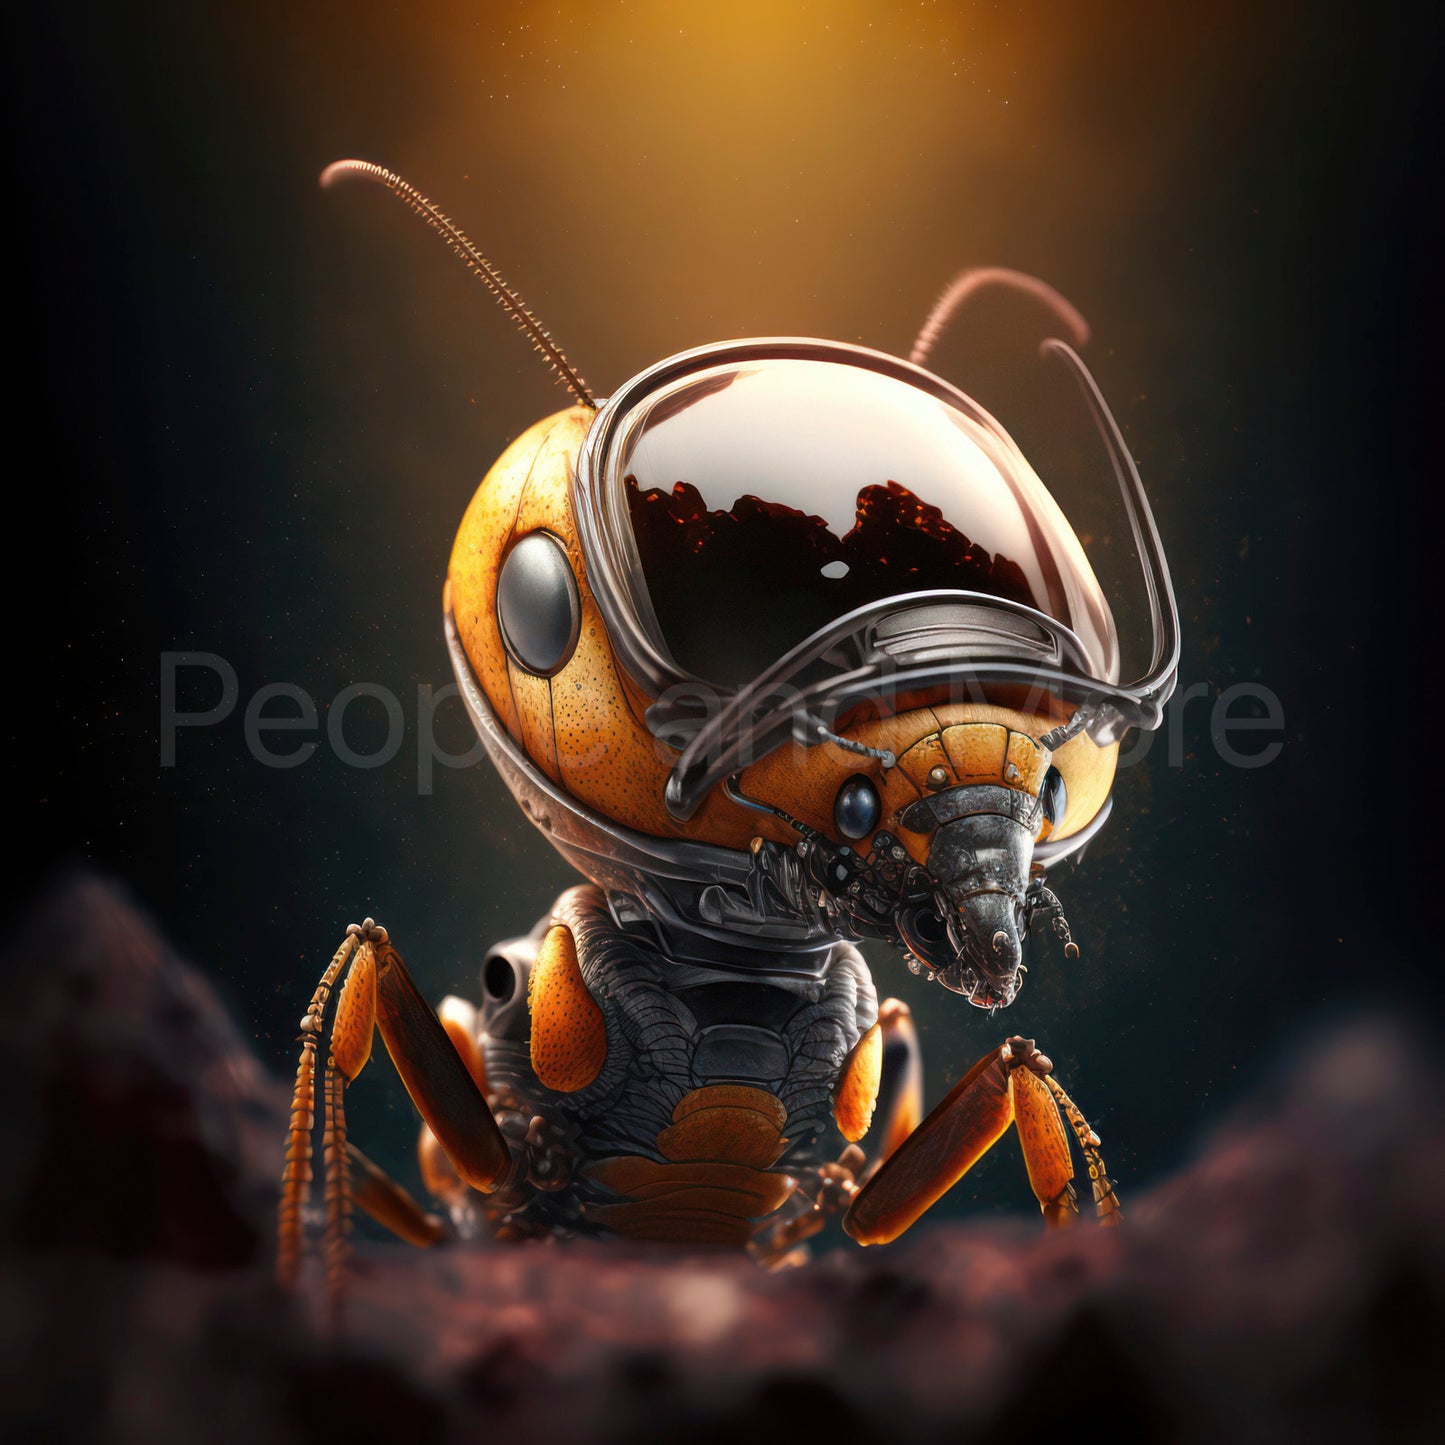 Space Ant